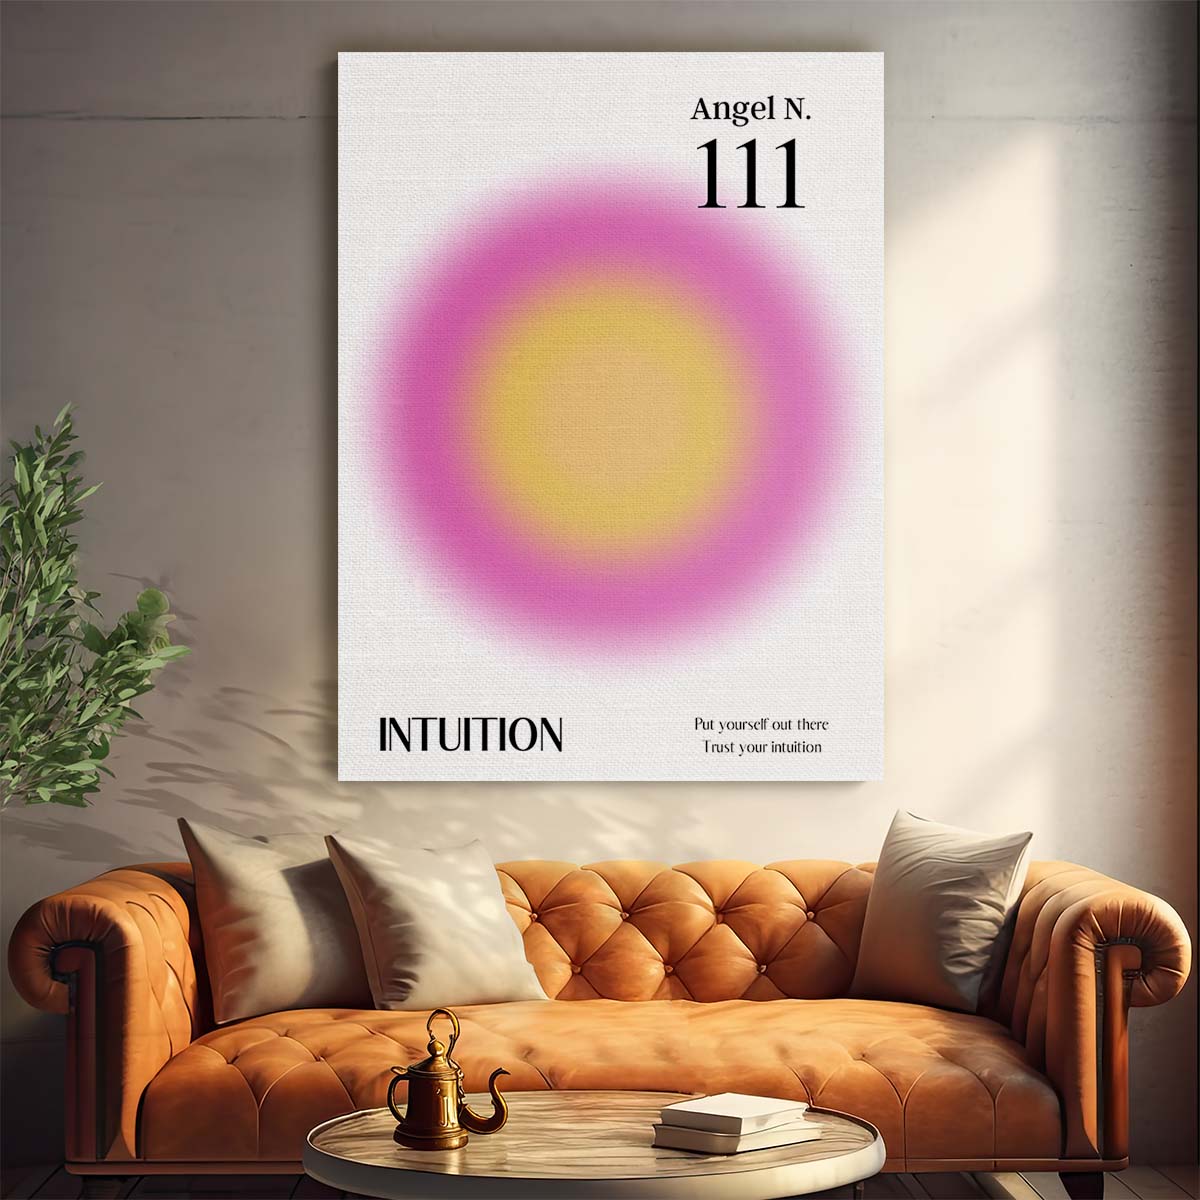 Angel Number 111 Motivational Illustration, Law of Attraction Poster by Luxuriance Designs, made in USA